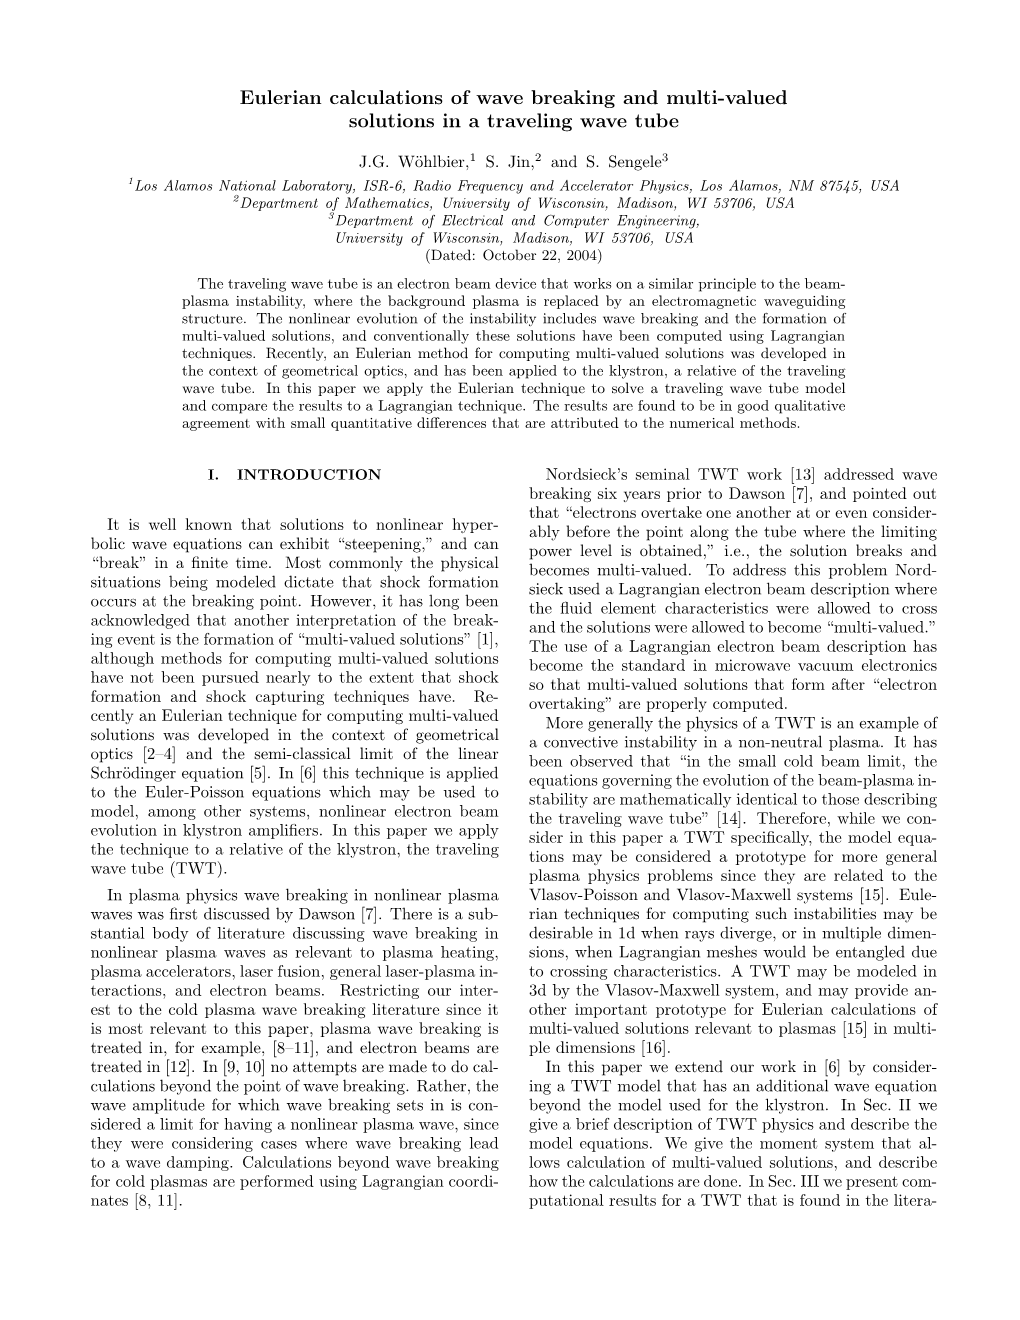 Eulerian Calculations of Wave Breaking and Multi-Valued Solutions in a Traveling Wave Tube